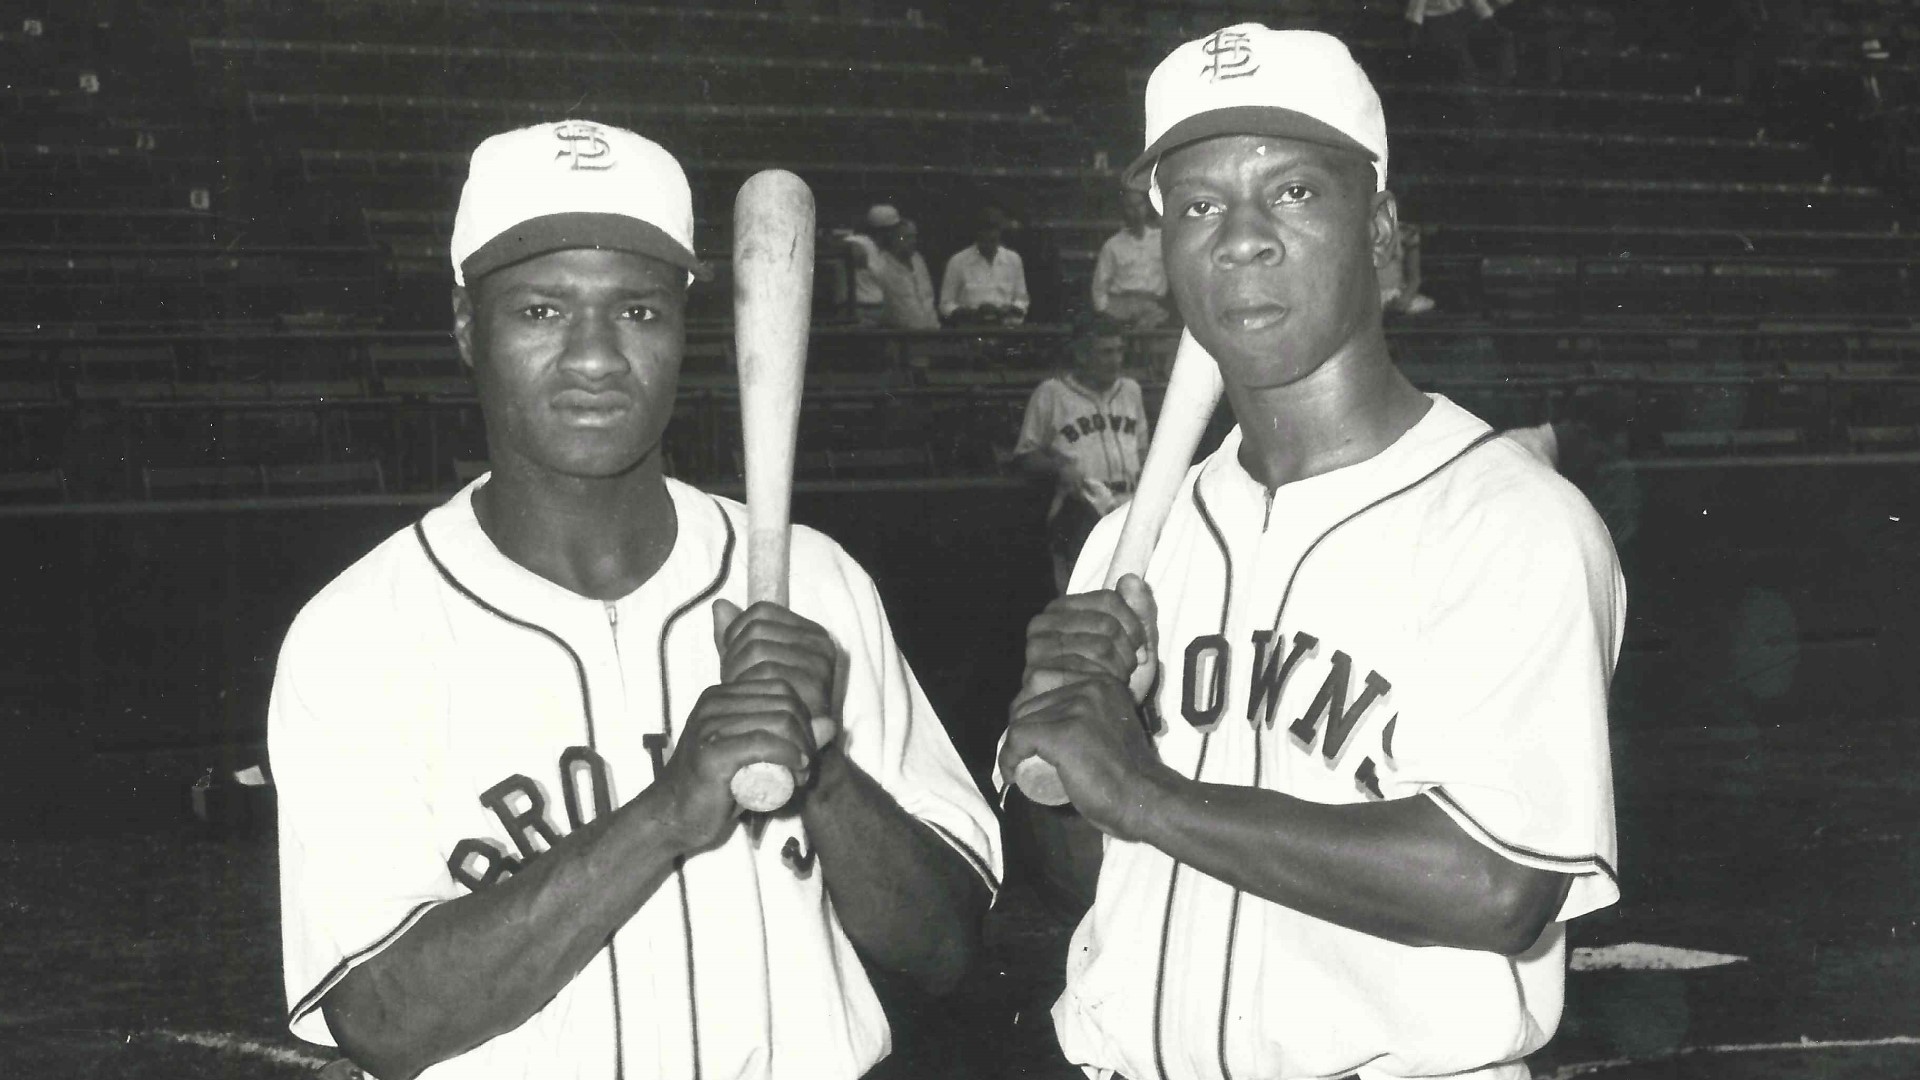 They were the third and fourth Black players in MLB history and the first in St. Louis. But Hank Thompson and Willard Brown's stories are often overlooked.